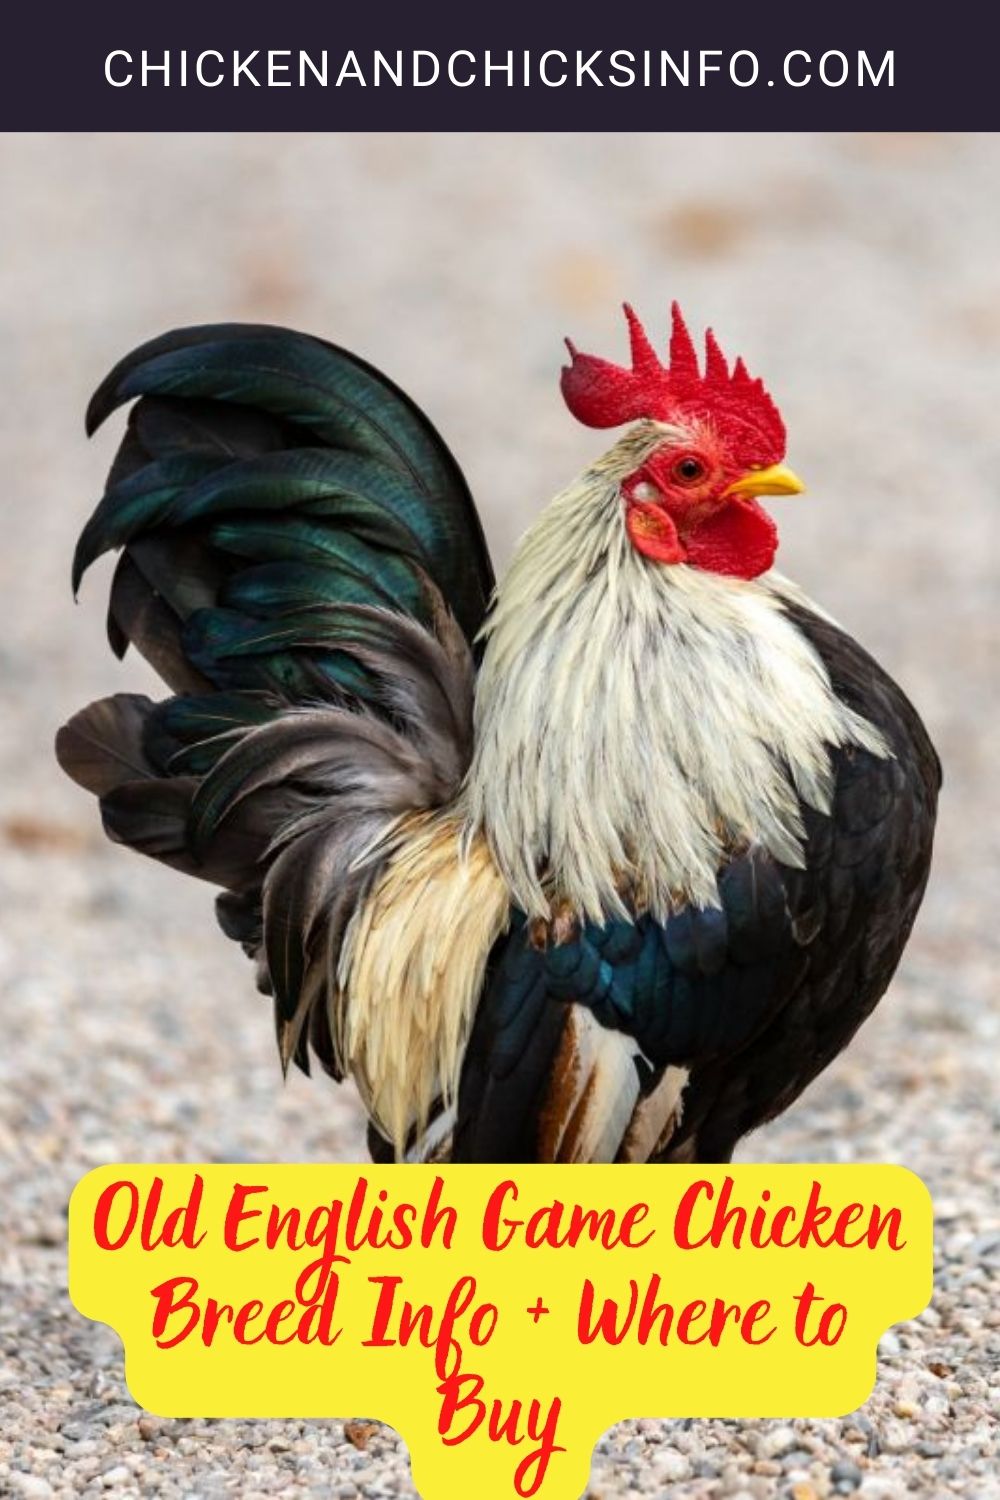 Old English Game Chicken Breed Info + Where to Buy pinterest image.